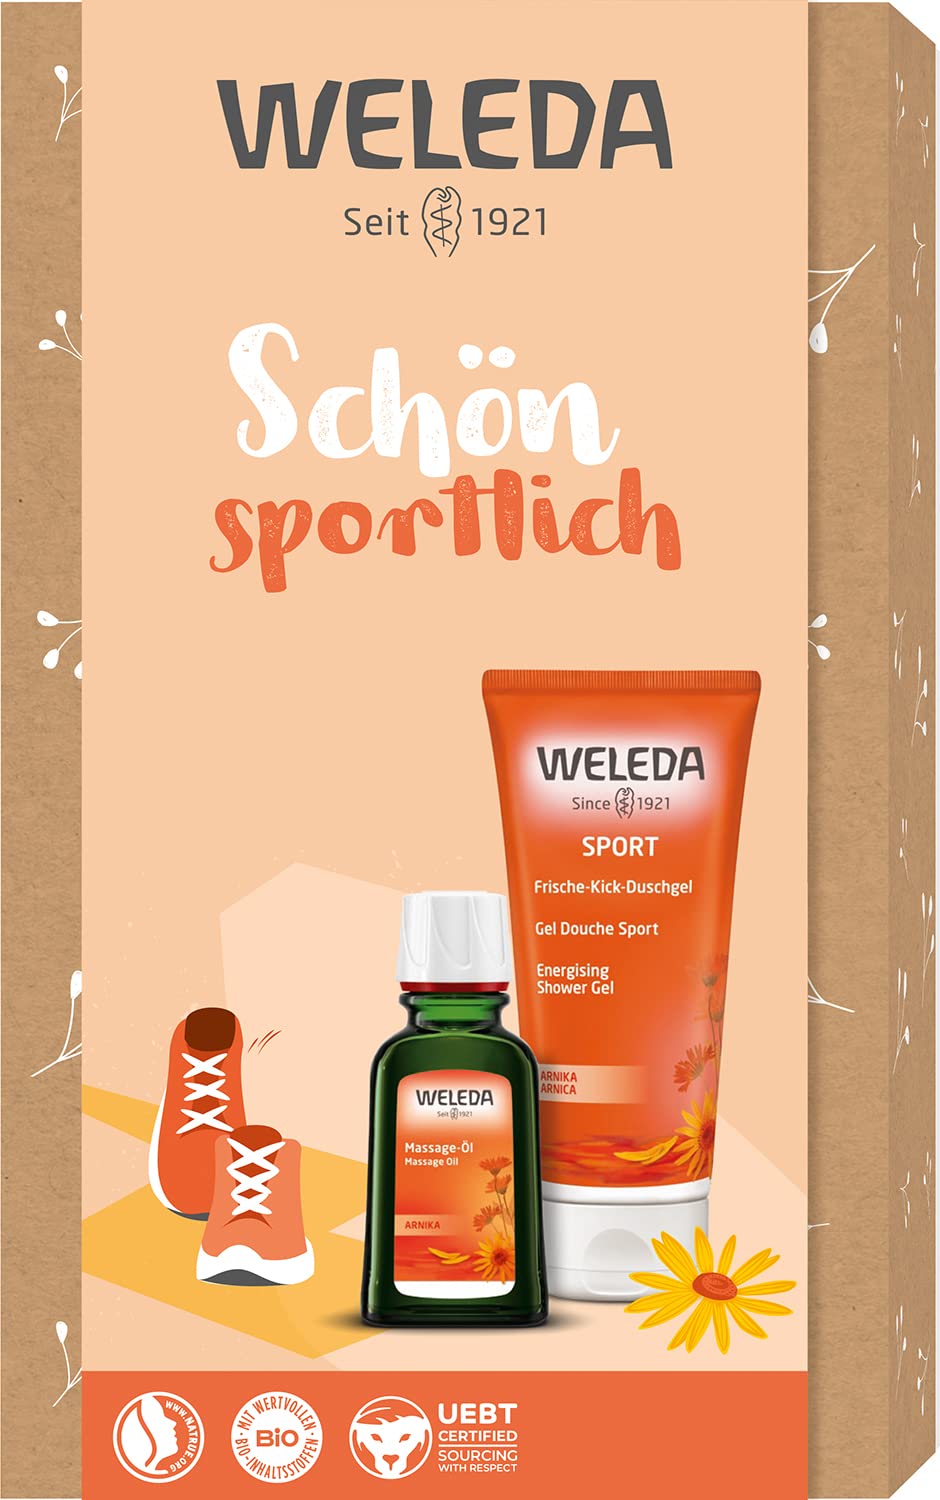 Weleda Sport 2023 Organic Gift Set Natural Cosmetics Care Gift Set Consisting of Sport Fresh Kick Shower Gel and Arnica Massage Oil Optimal and a Must-Have for Daily Body Aft Sports